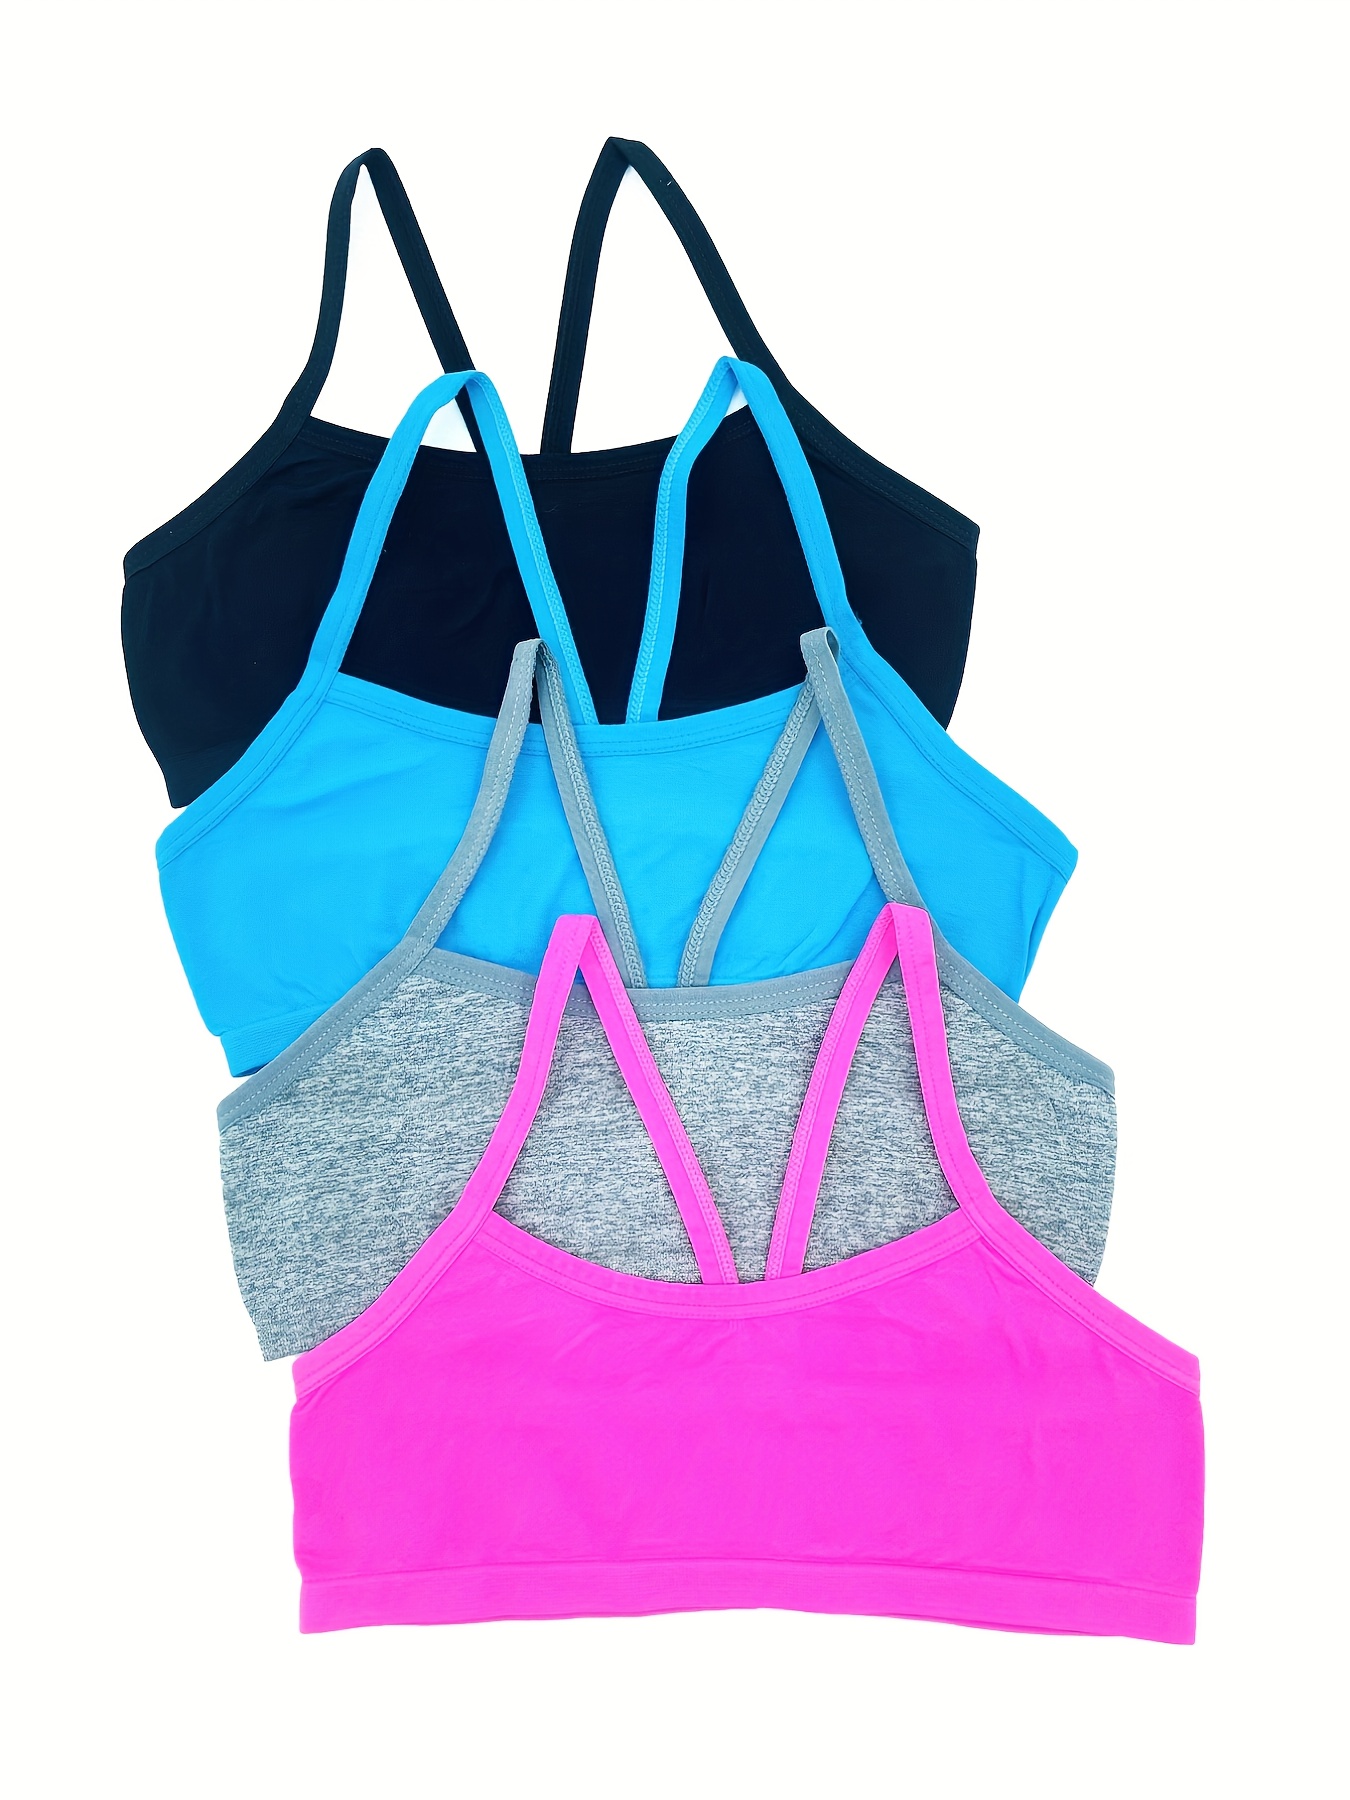 Girls Bra Cotton Tops Sports Bras Without Bones School Students Underwear  Teens Crop Top 12 Years Old Clothes For Teenagers